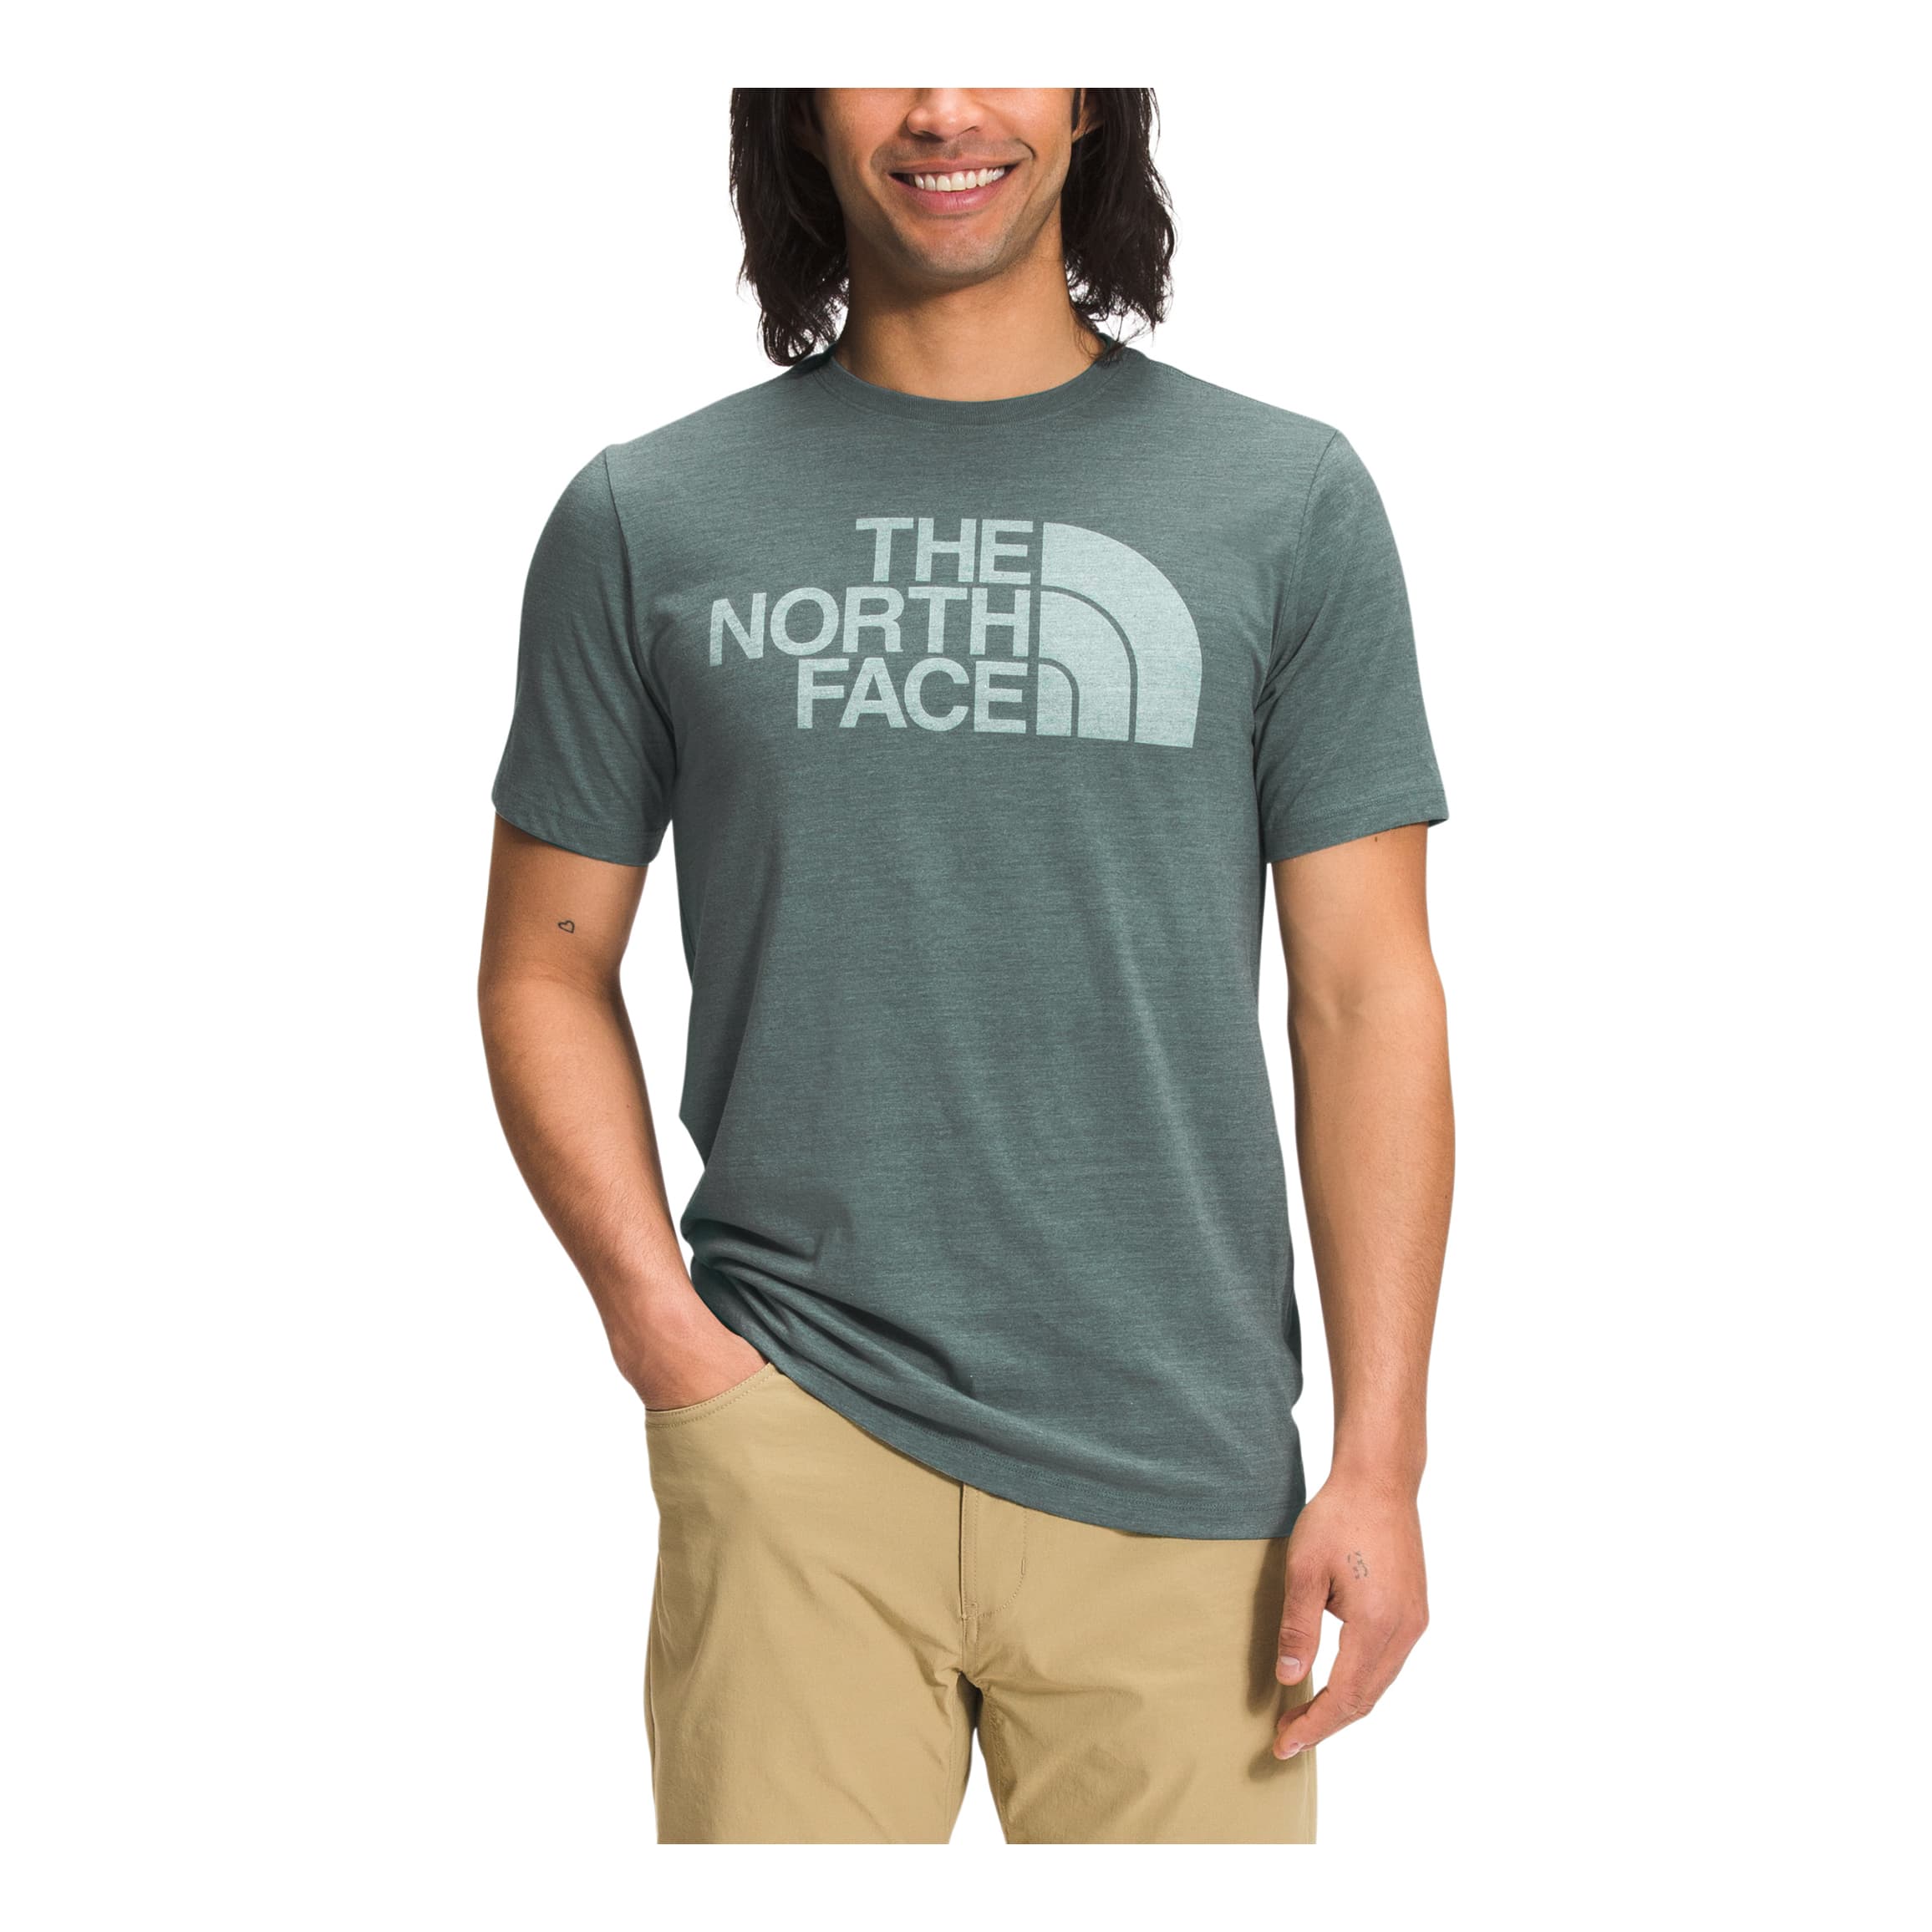 The North Face® Men’s Half Dome Tri-Blend Short-Sleeve T-Shirt